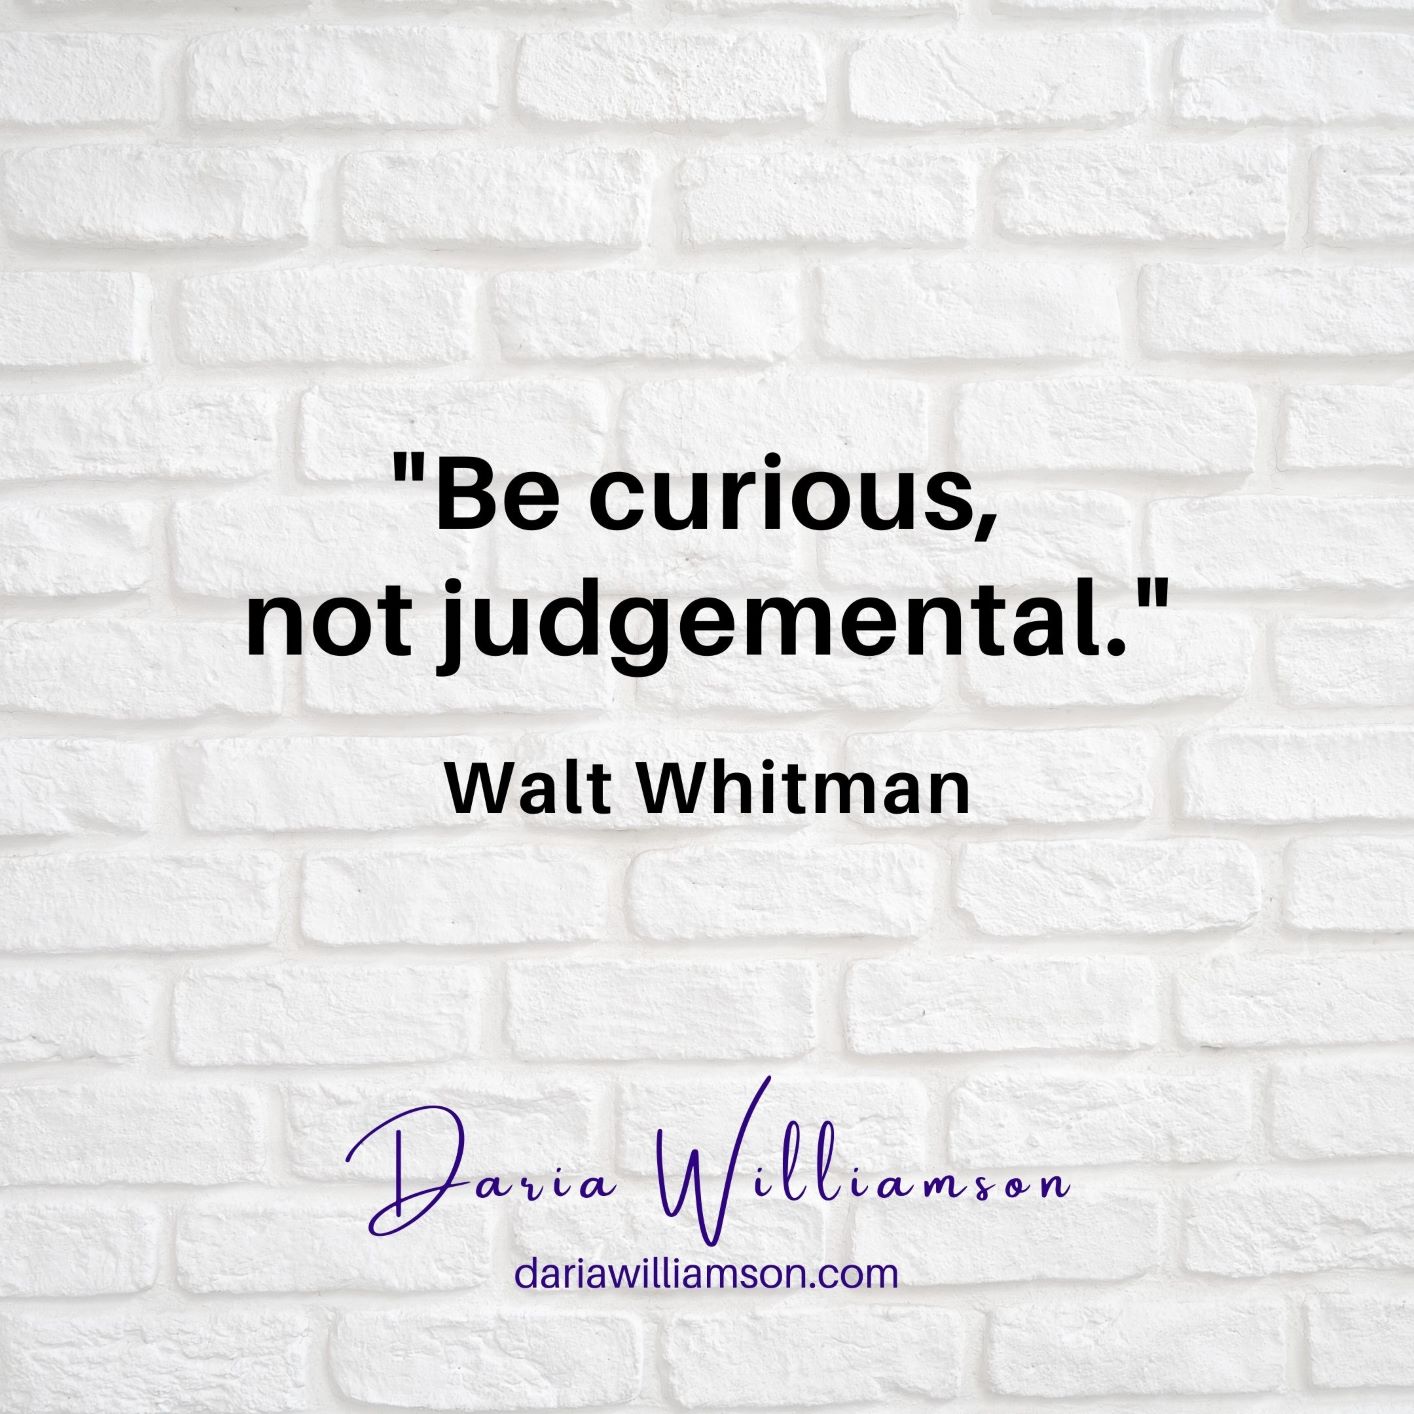 Black text on white background: "Be curious, not judgemental" Walt Whitman